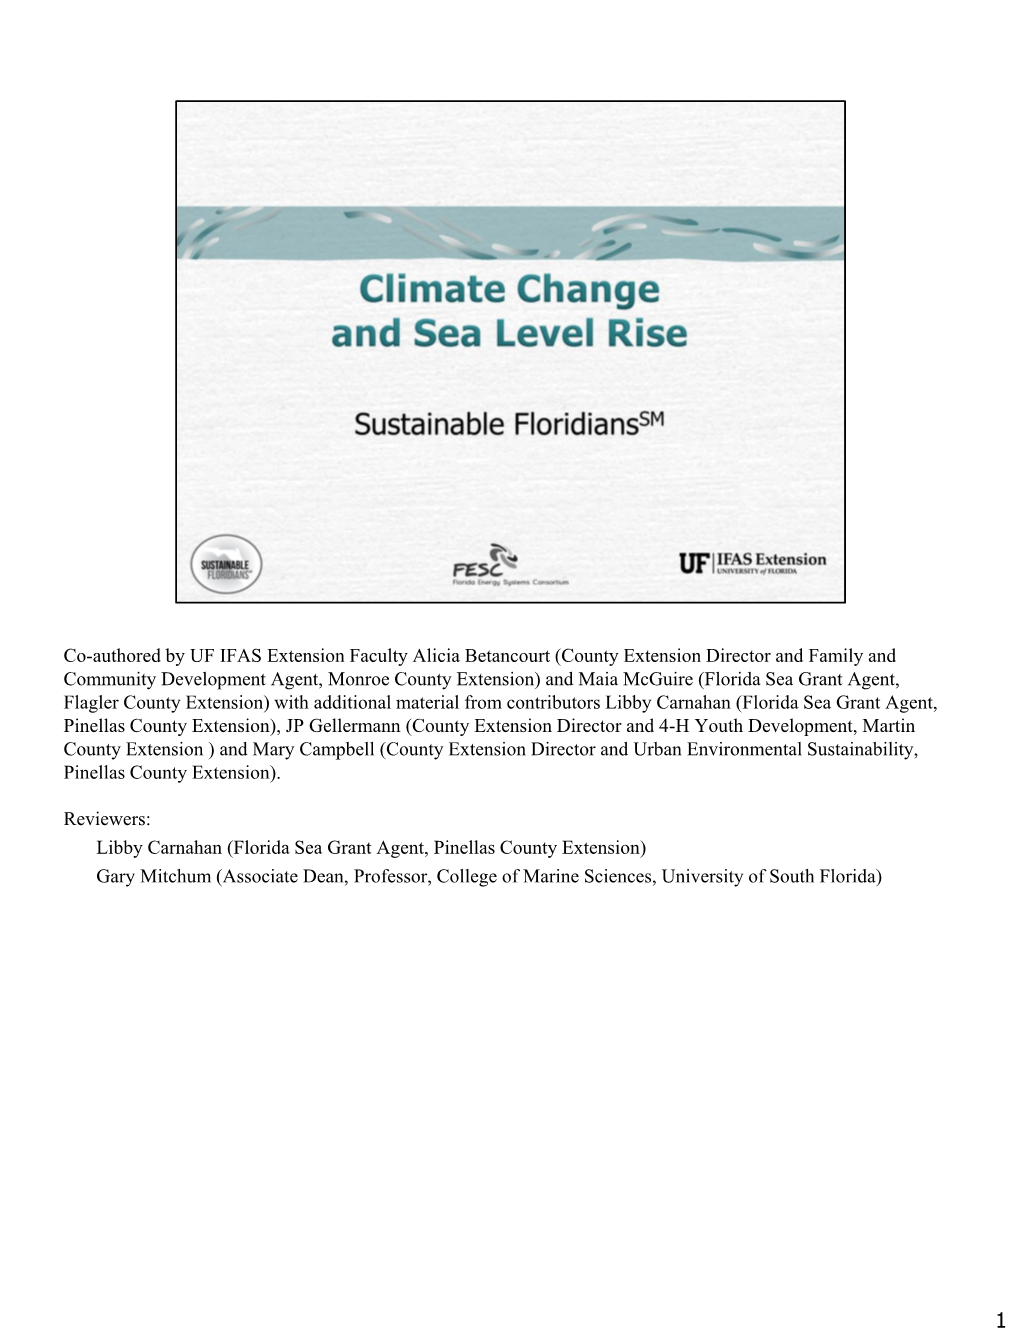 Climate Change and Sea Level Rise and the Consequences We May Have to Face As a Result